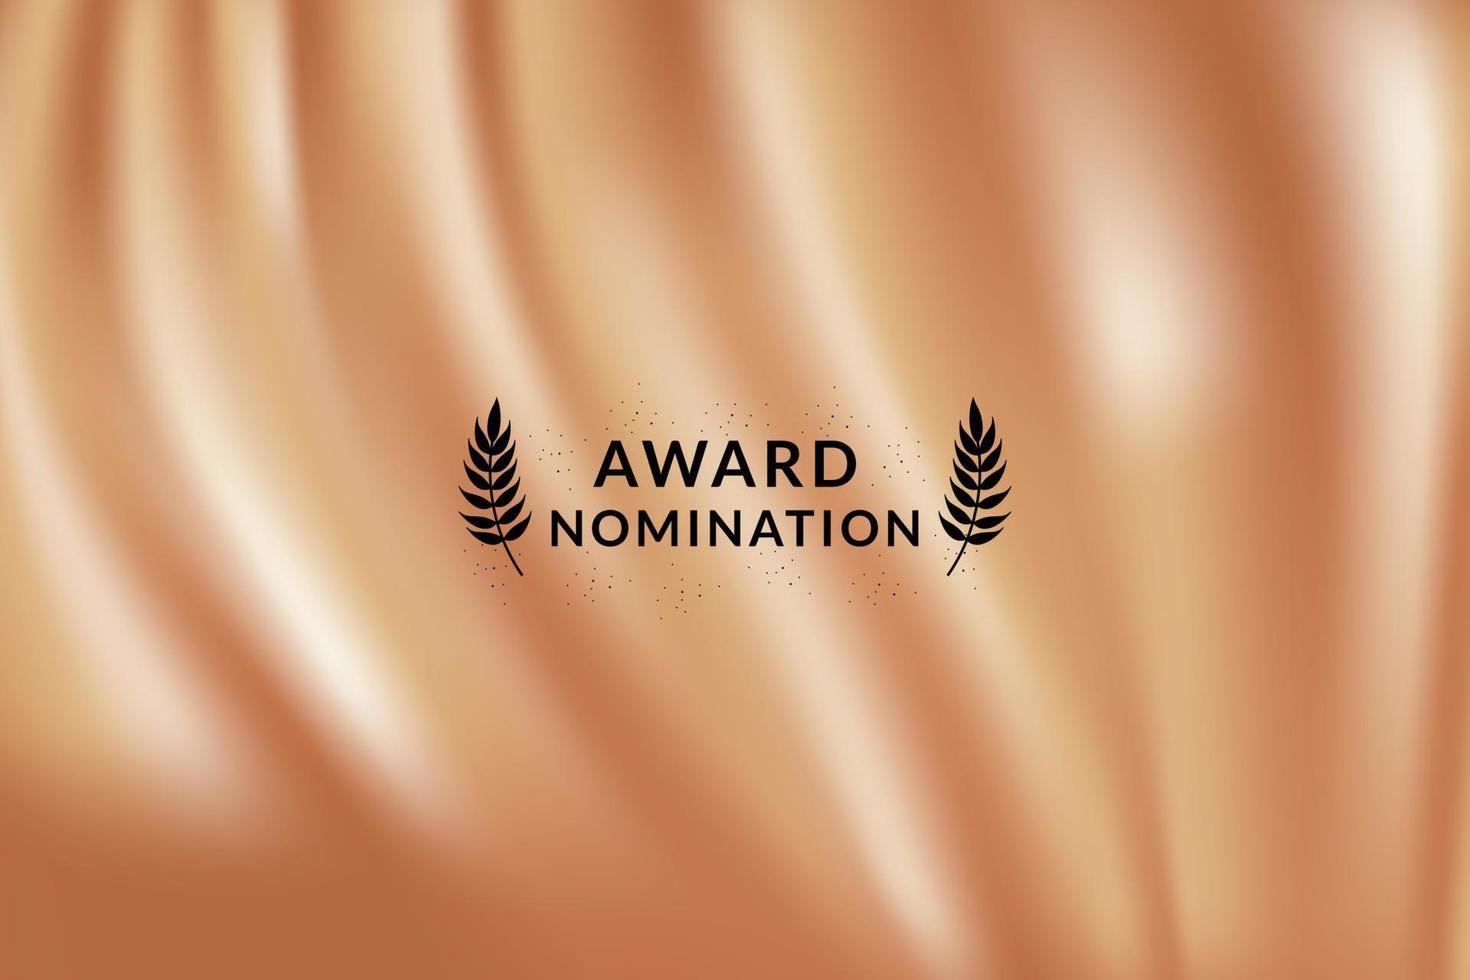 Award nomination ceremony luxury background with soft gold curtain cloth drape with wreath leaves vector